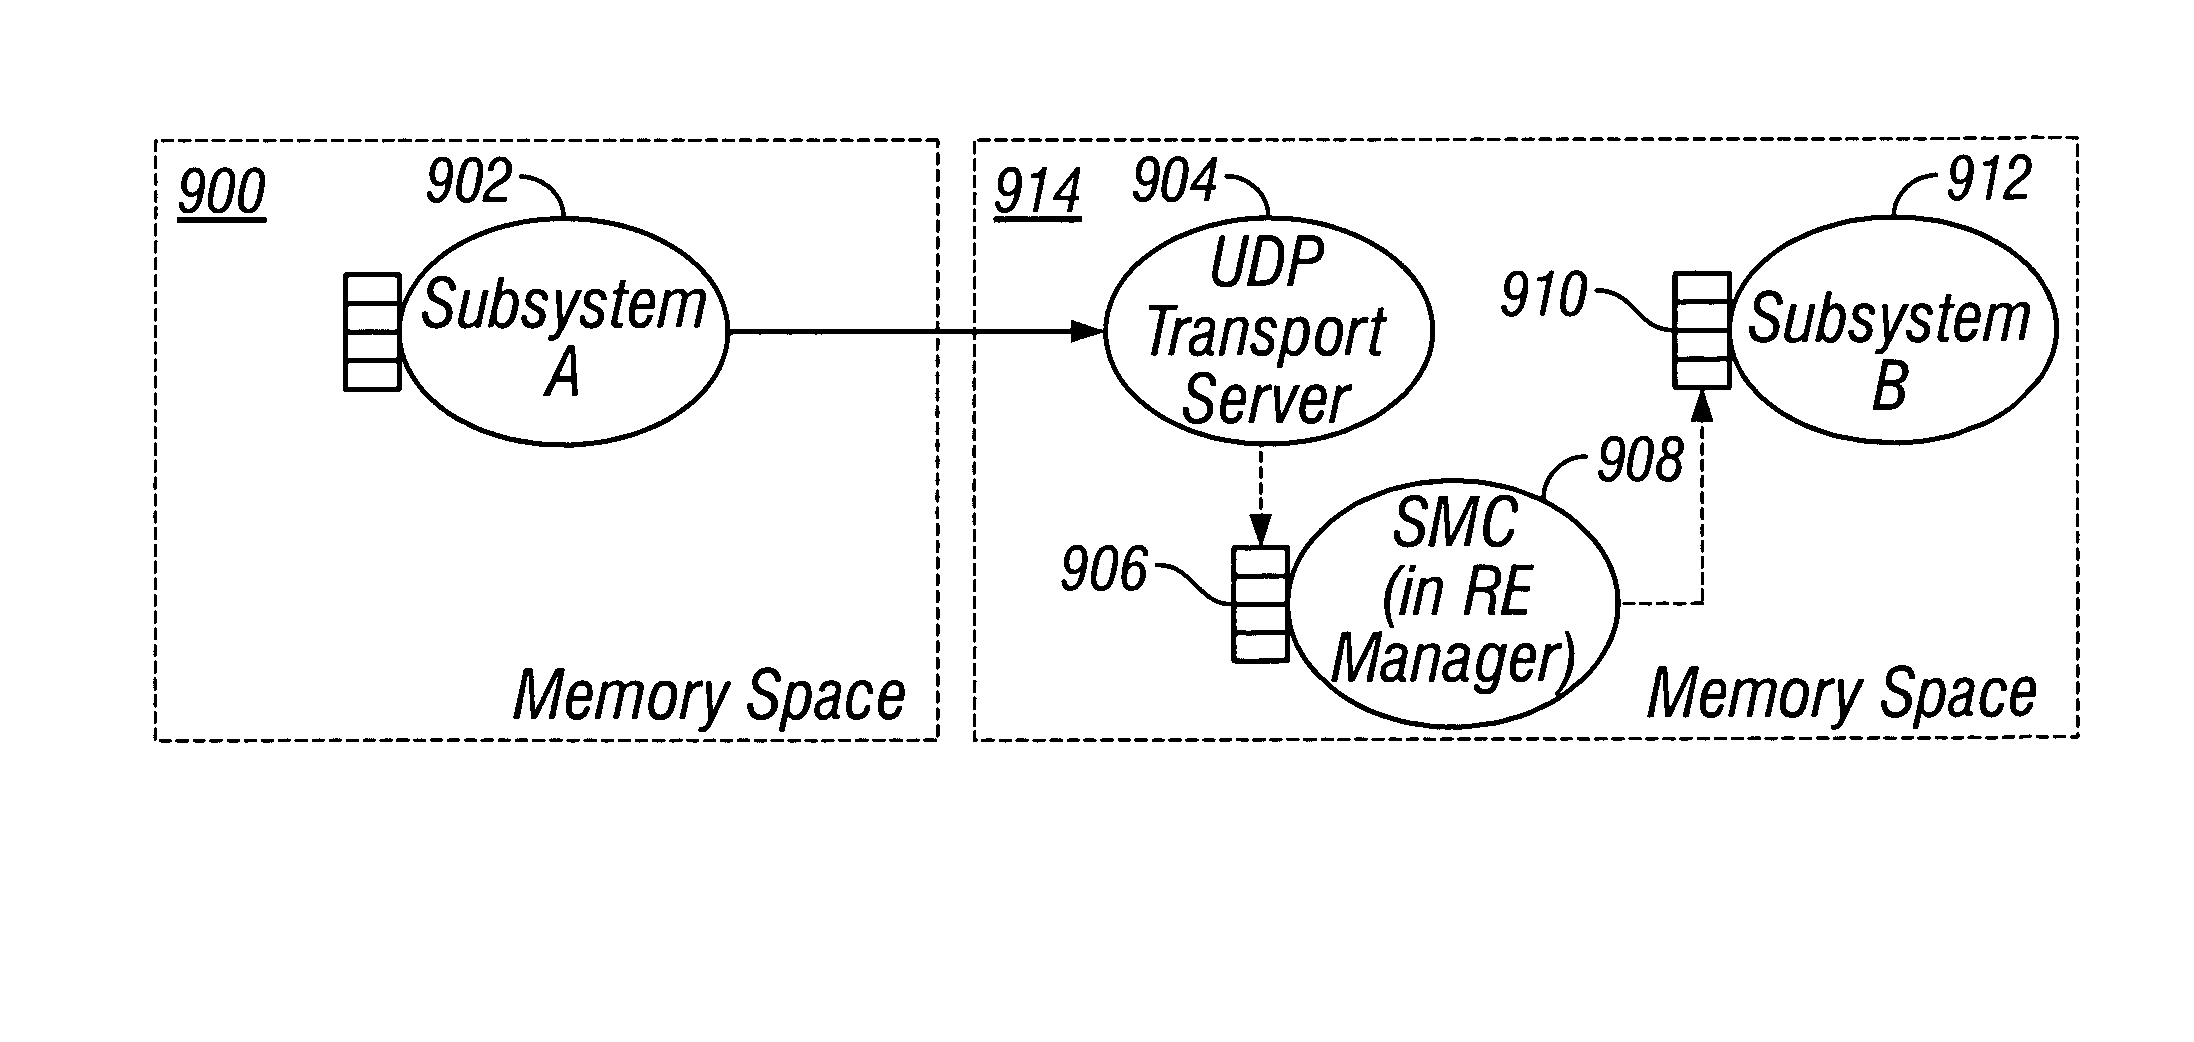 Adaptable control plane architecture for a network element